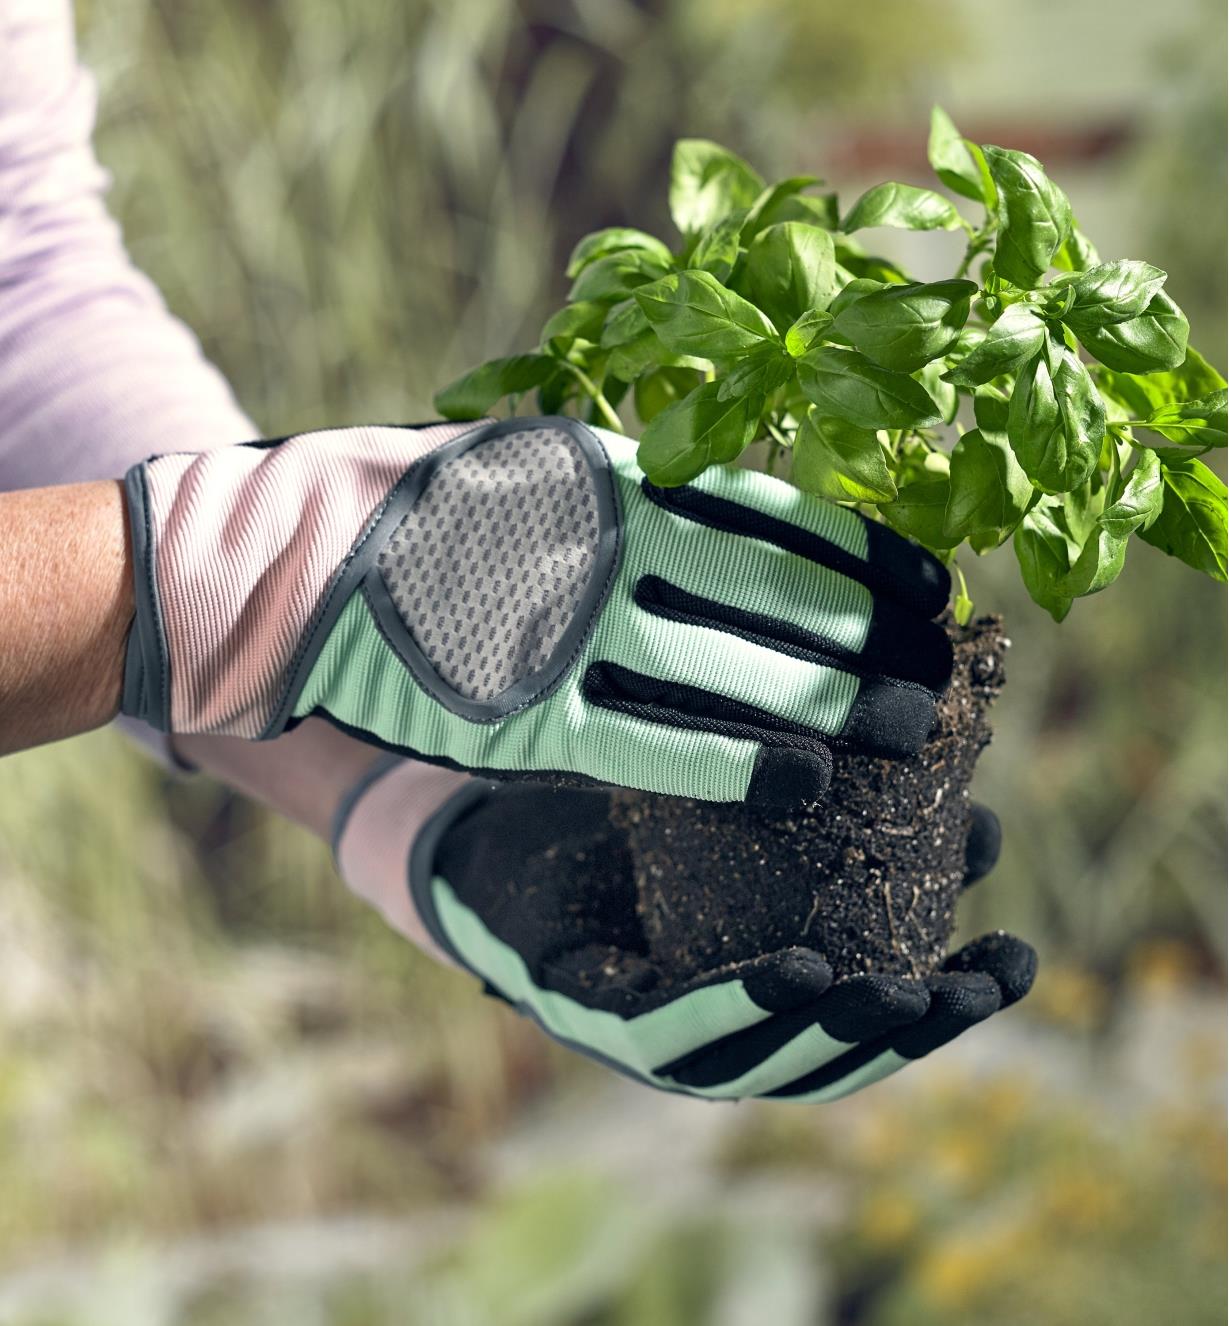 Wearing women’s garden gloves to transfer a small plant